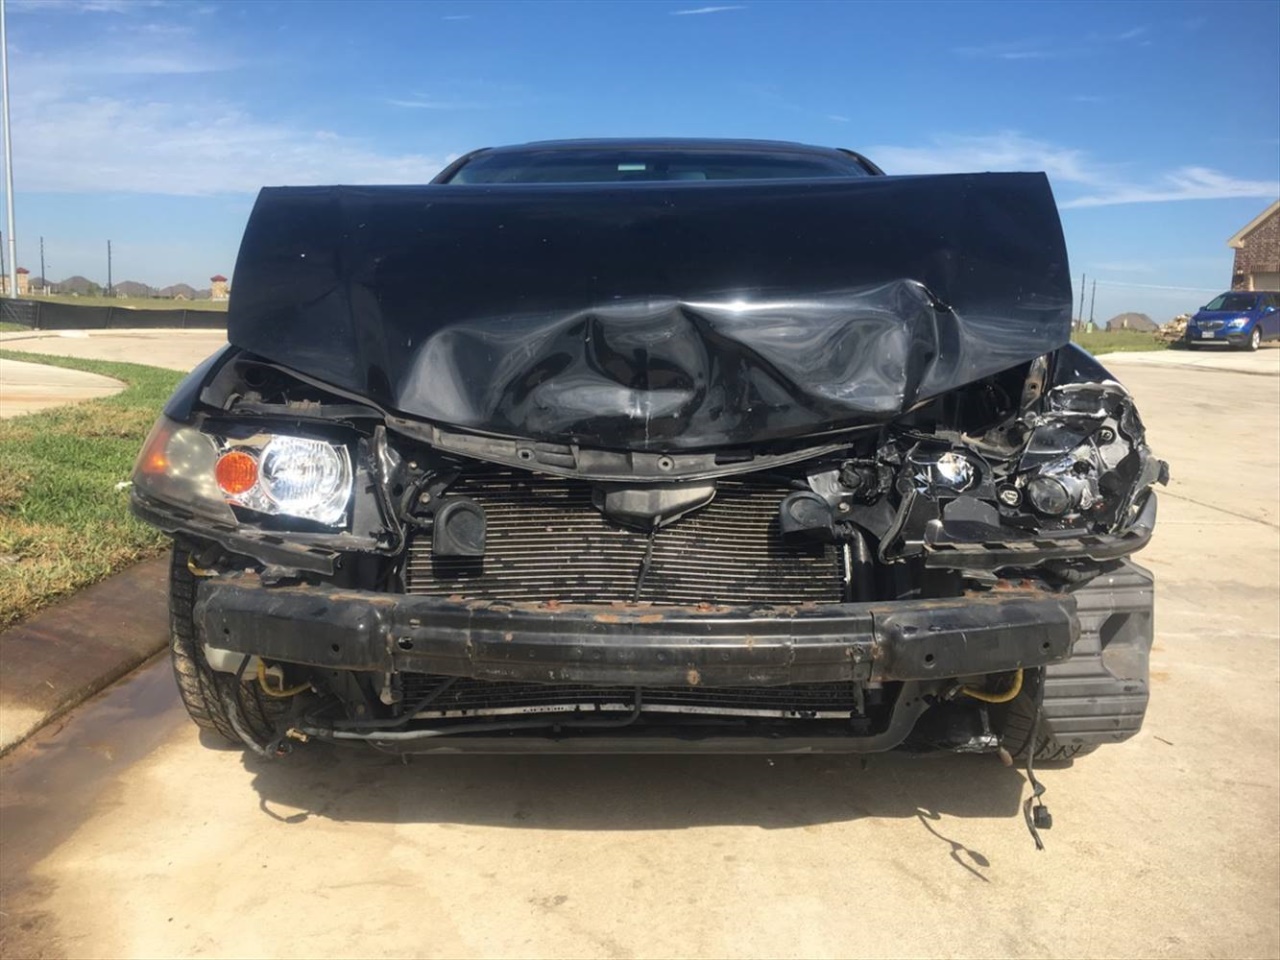 Selling Wrecked Car in Ohio